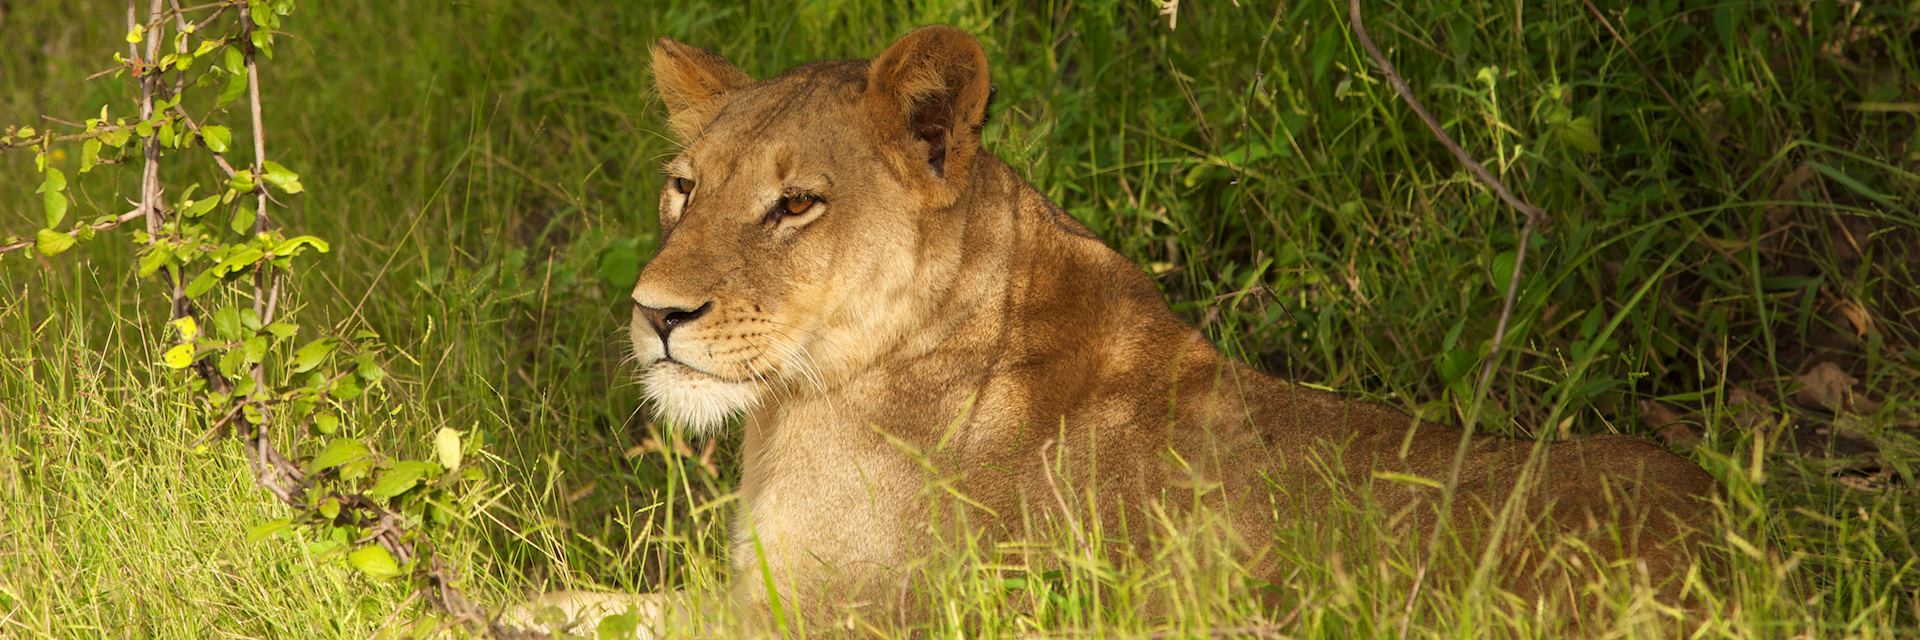 Lioness in North Luangwa National Park